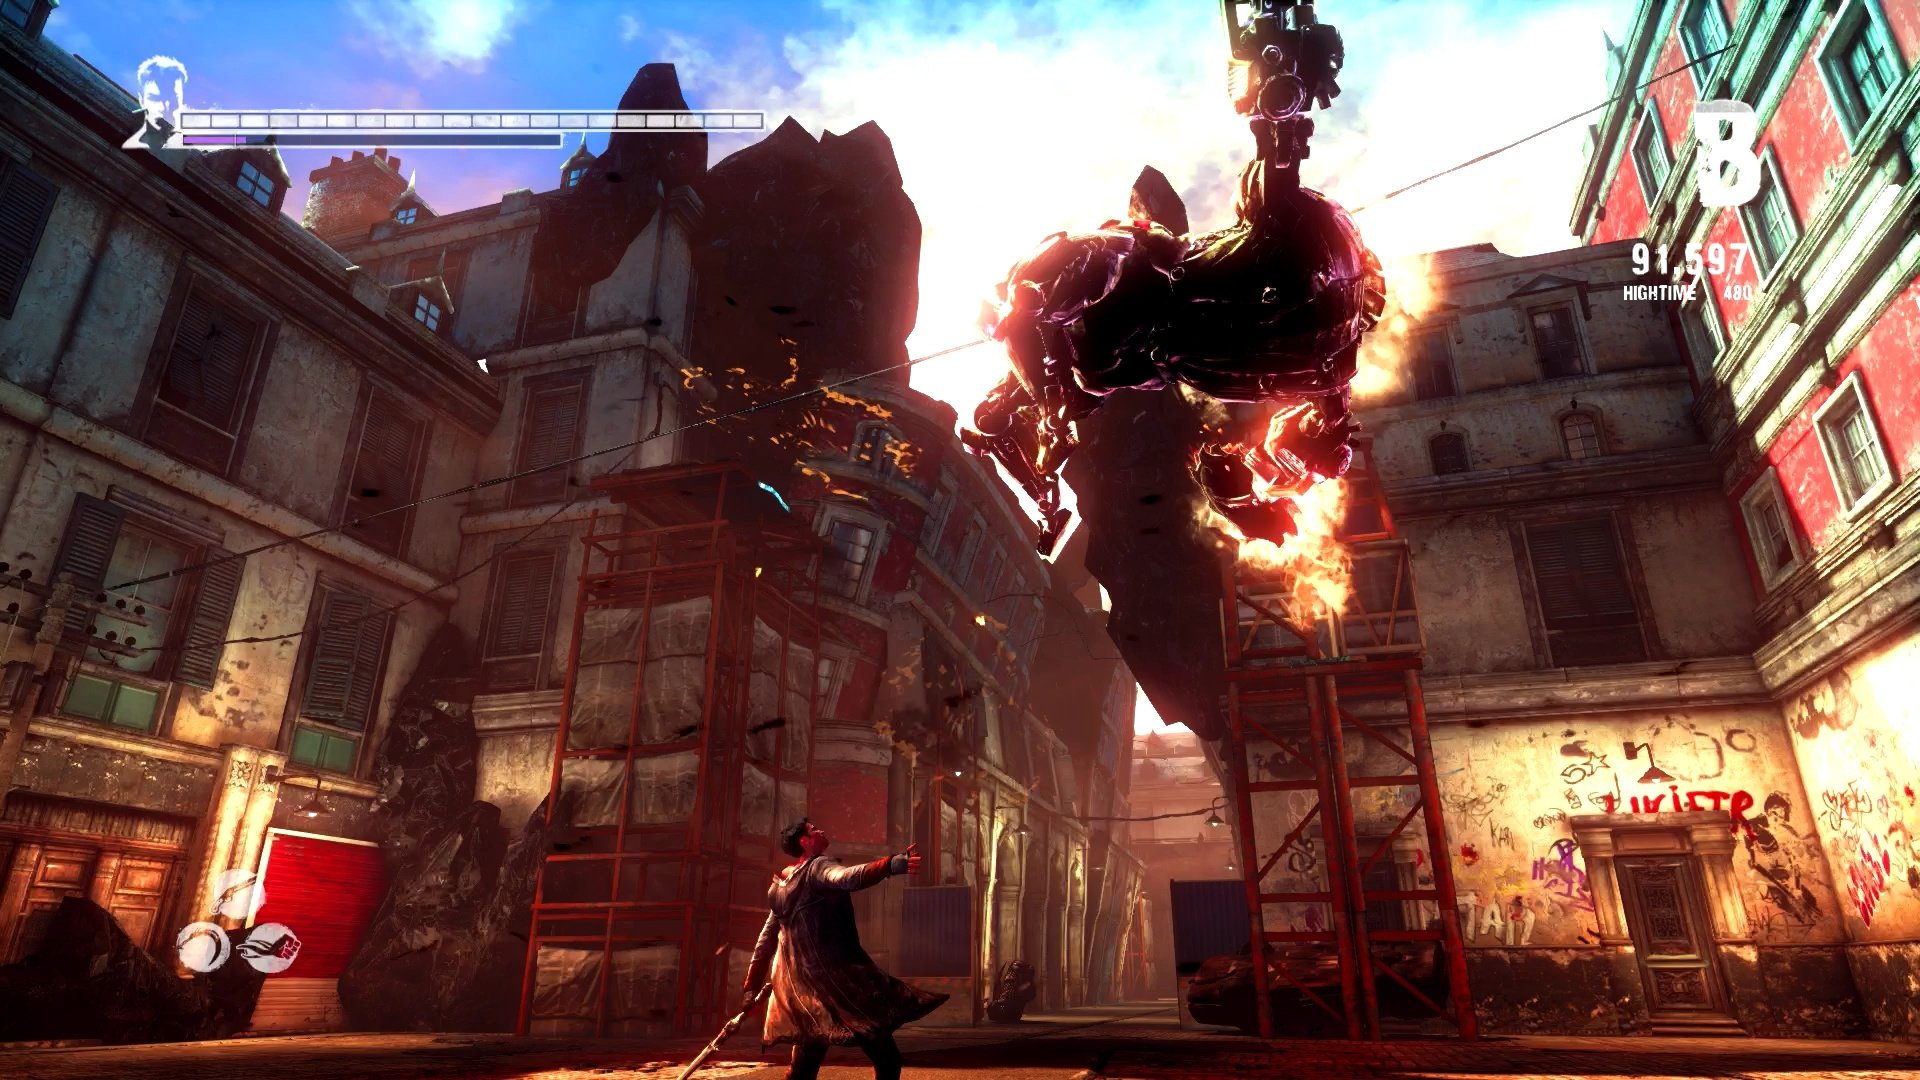 DmC: Devil May Cry Definitive Edition Review